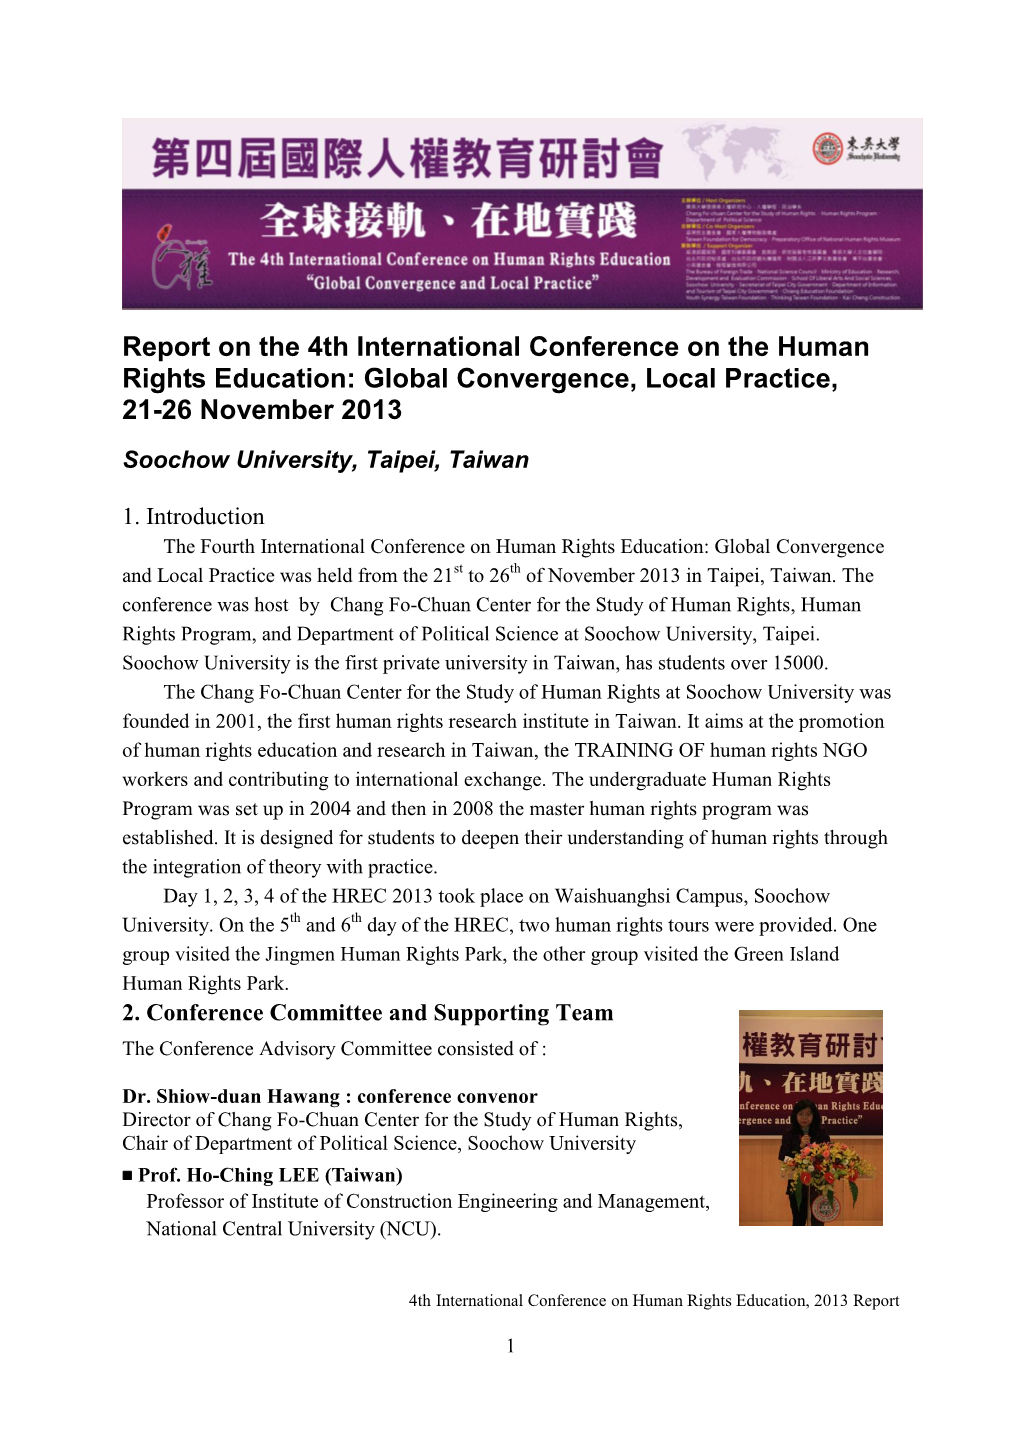 Report on the 4Th International Conference on the Human Rights Education: Global Convergence, Local Practice, 21-26 November 2013